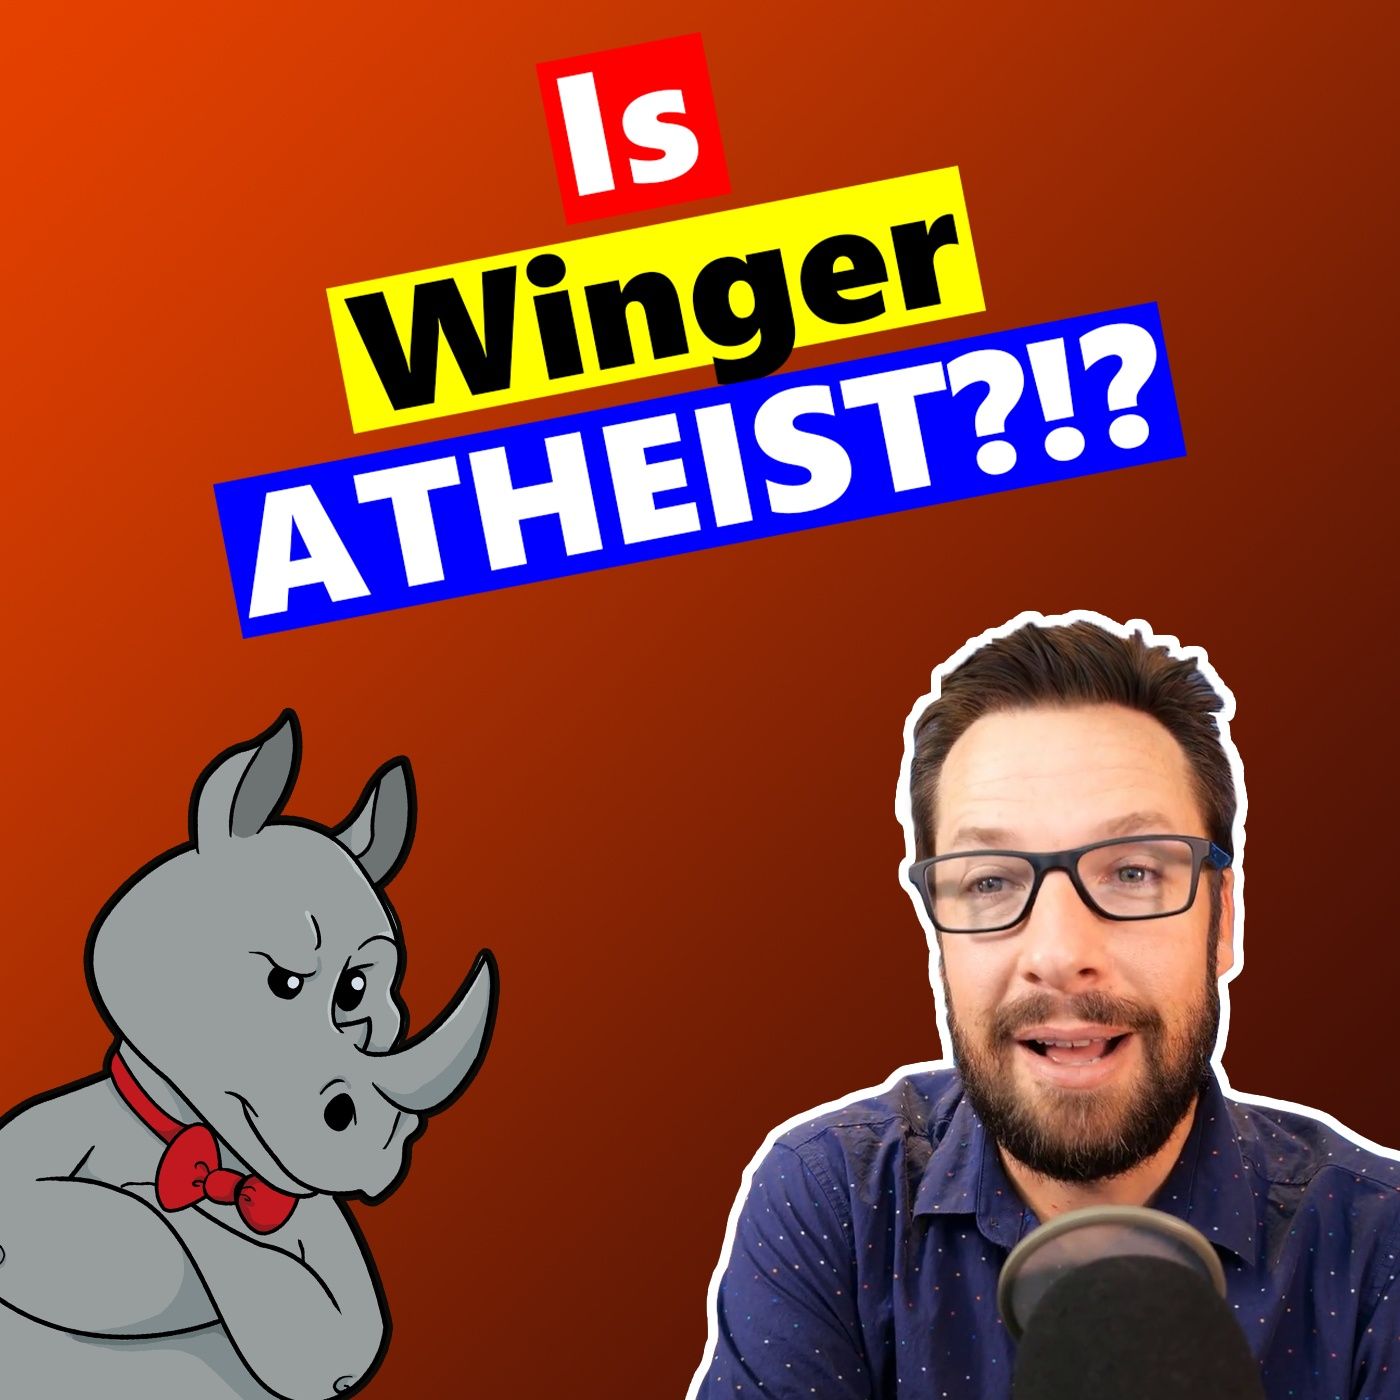 Is Mike Winger (Mostly) An Atheist?